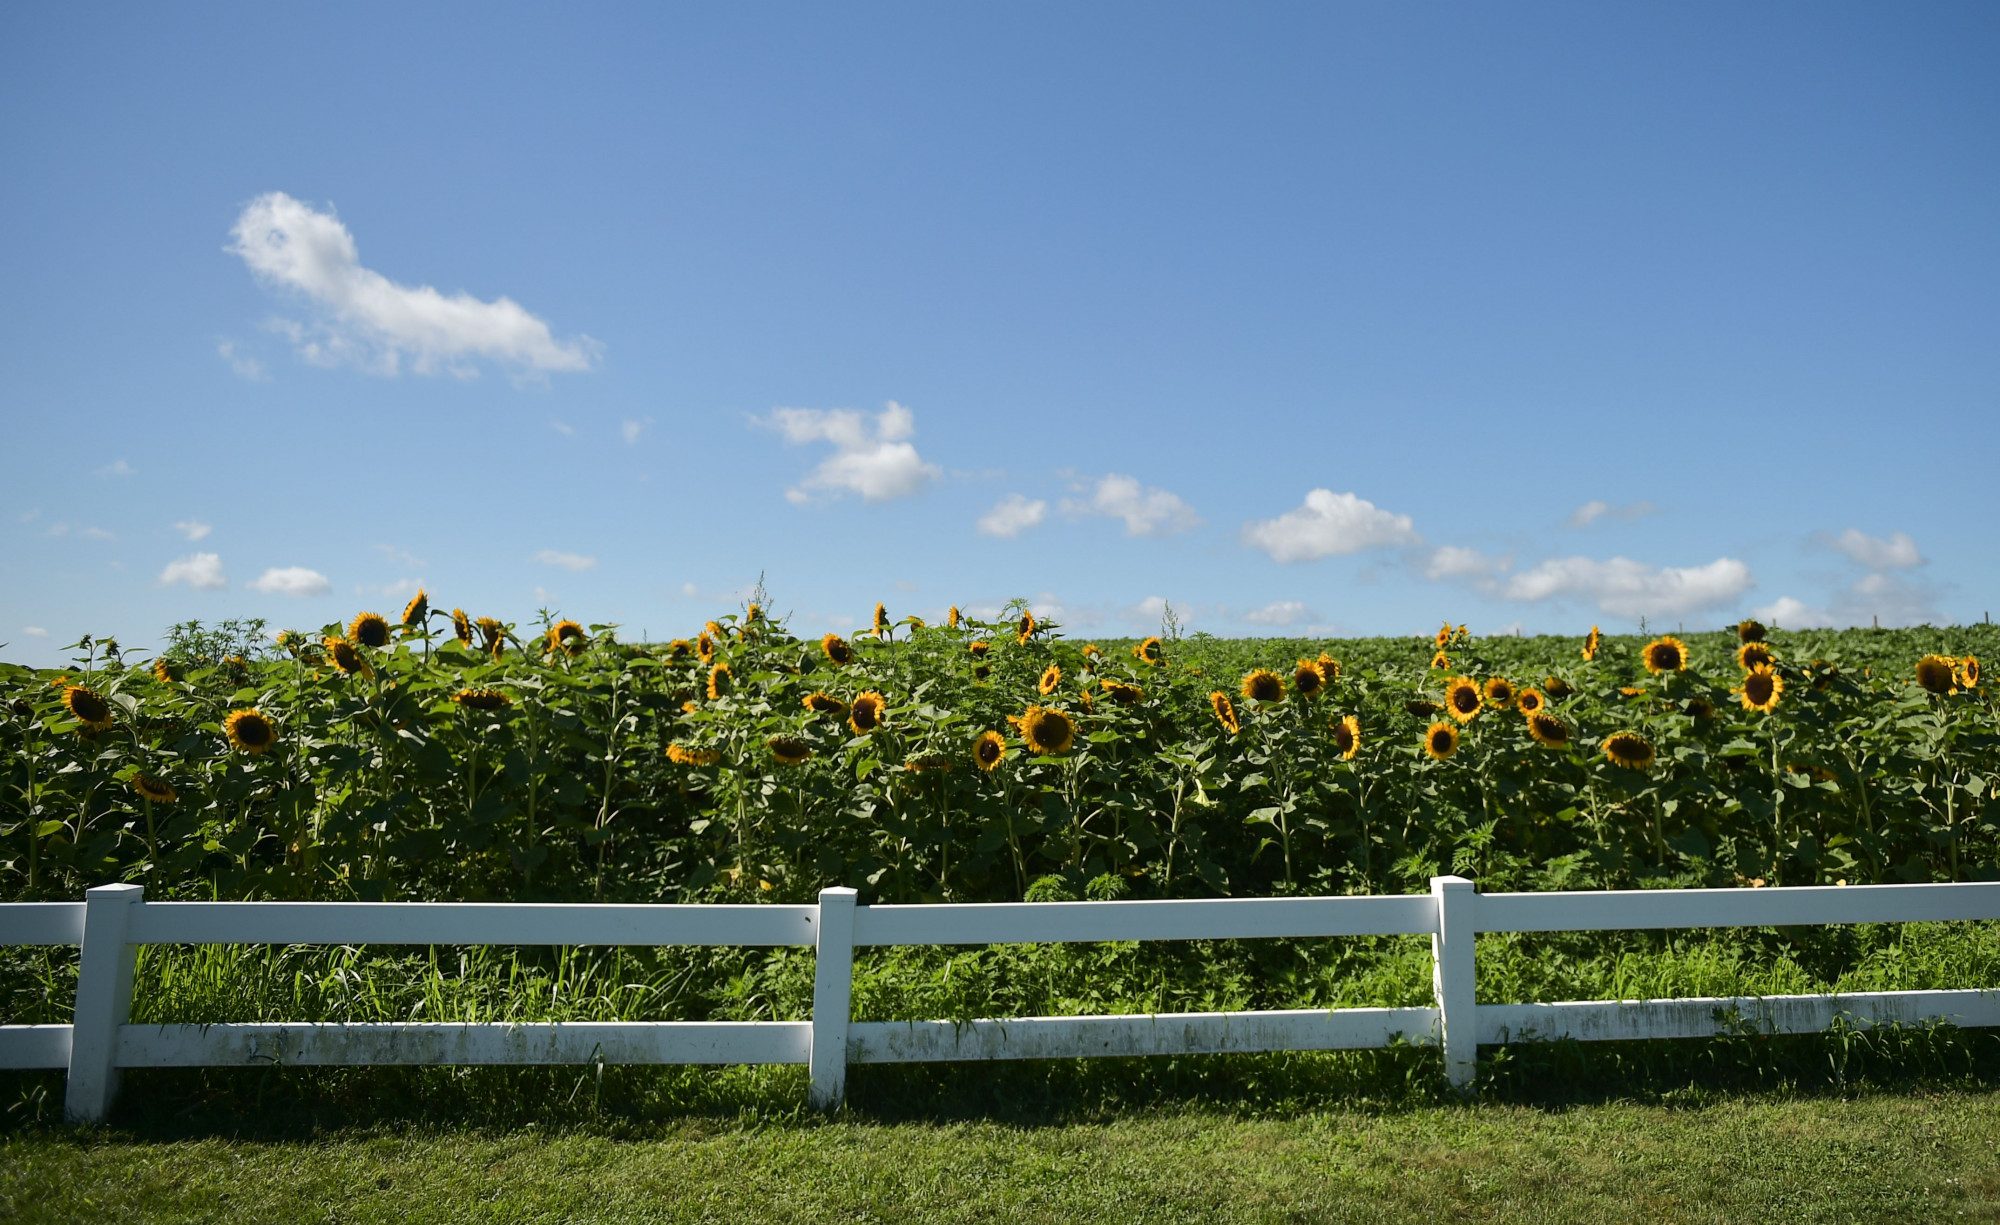 Is Now a Good Time to Invest in Farmland?